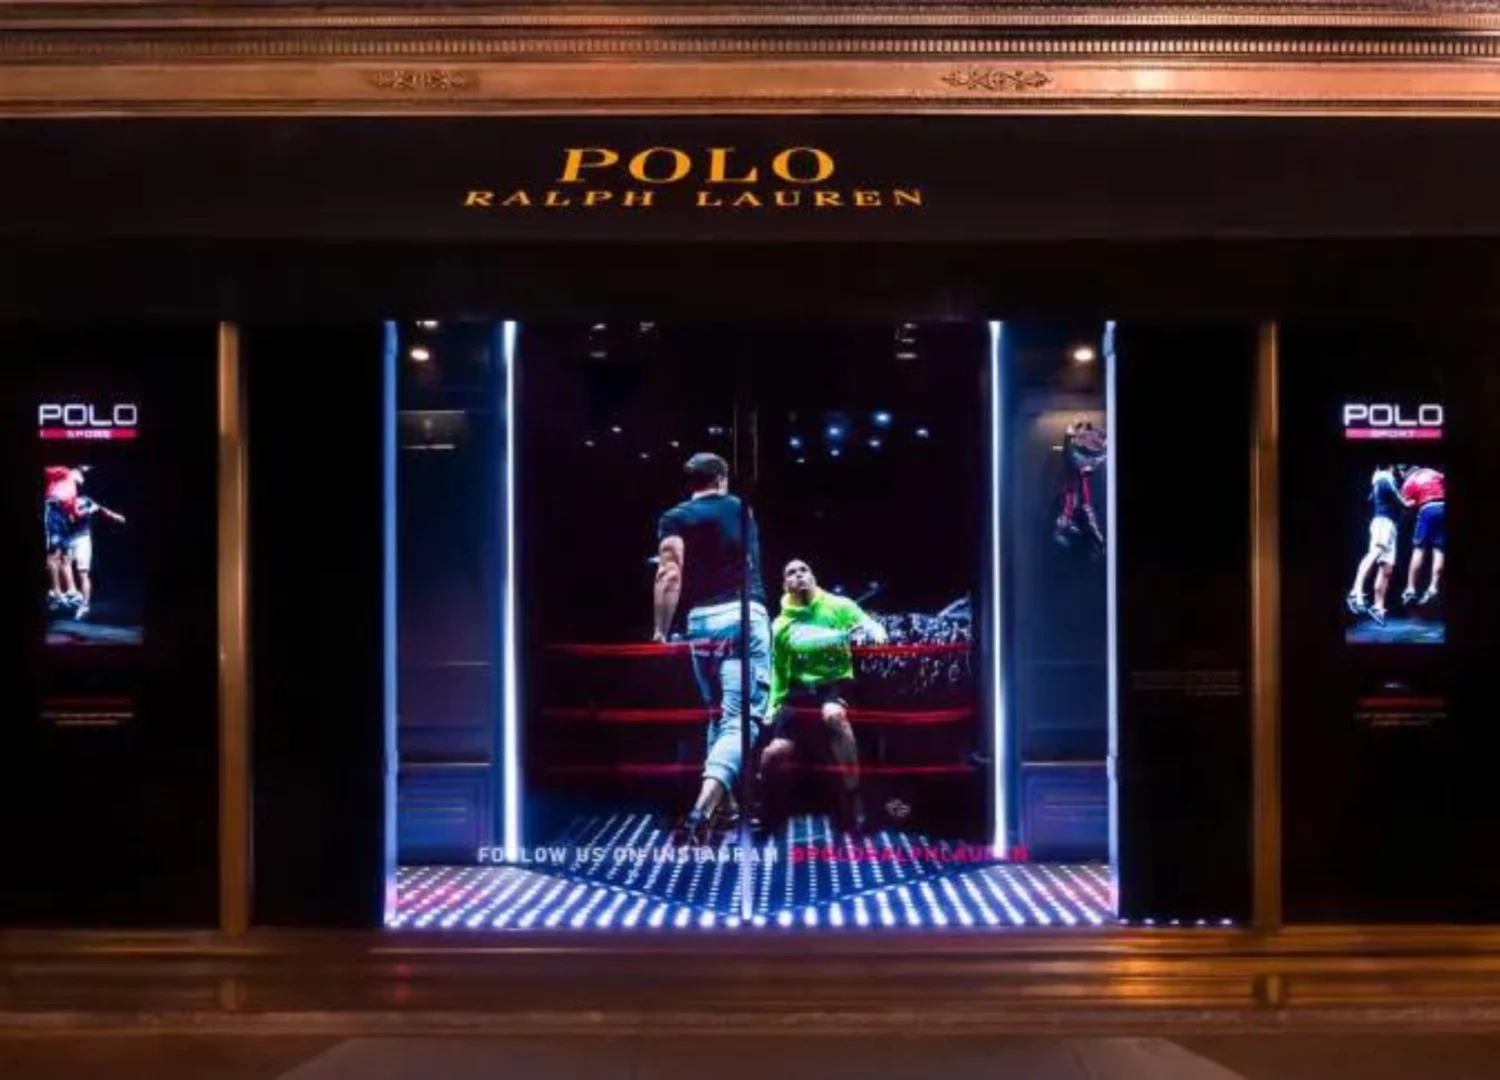 Image of LED Holographic Interactive display for Ralph Lauren Polo store